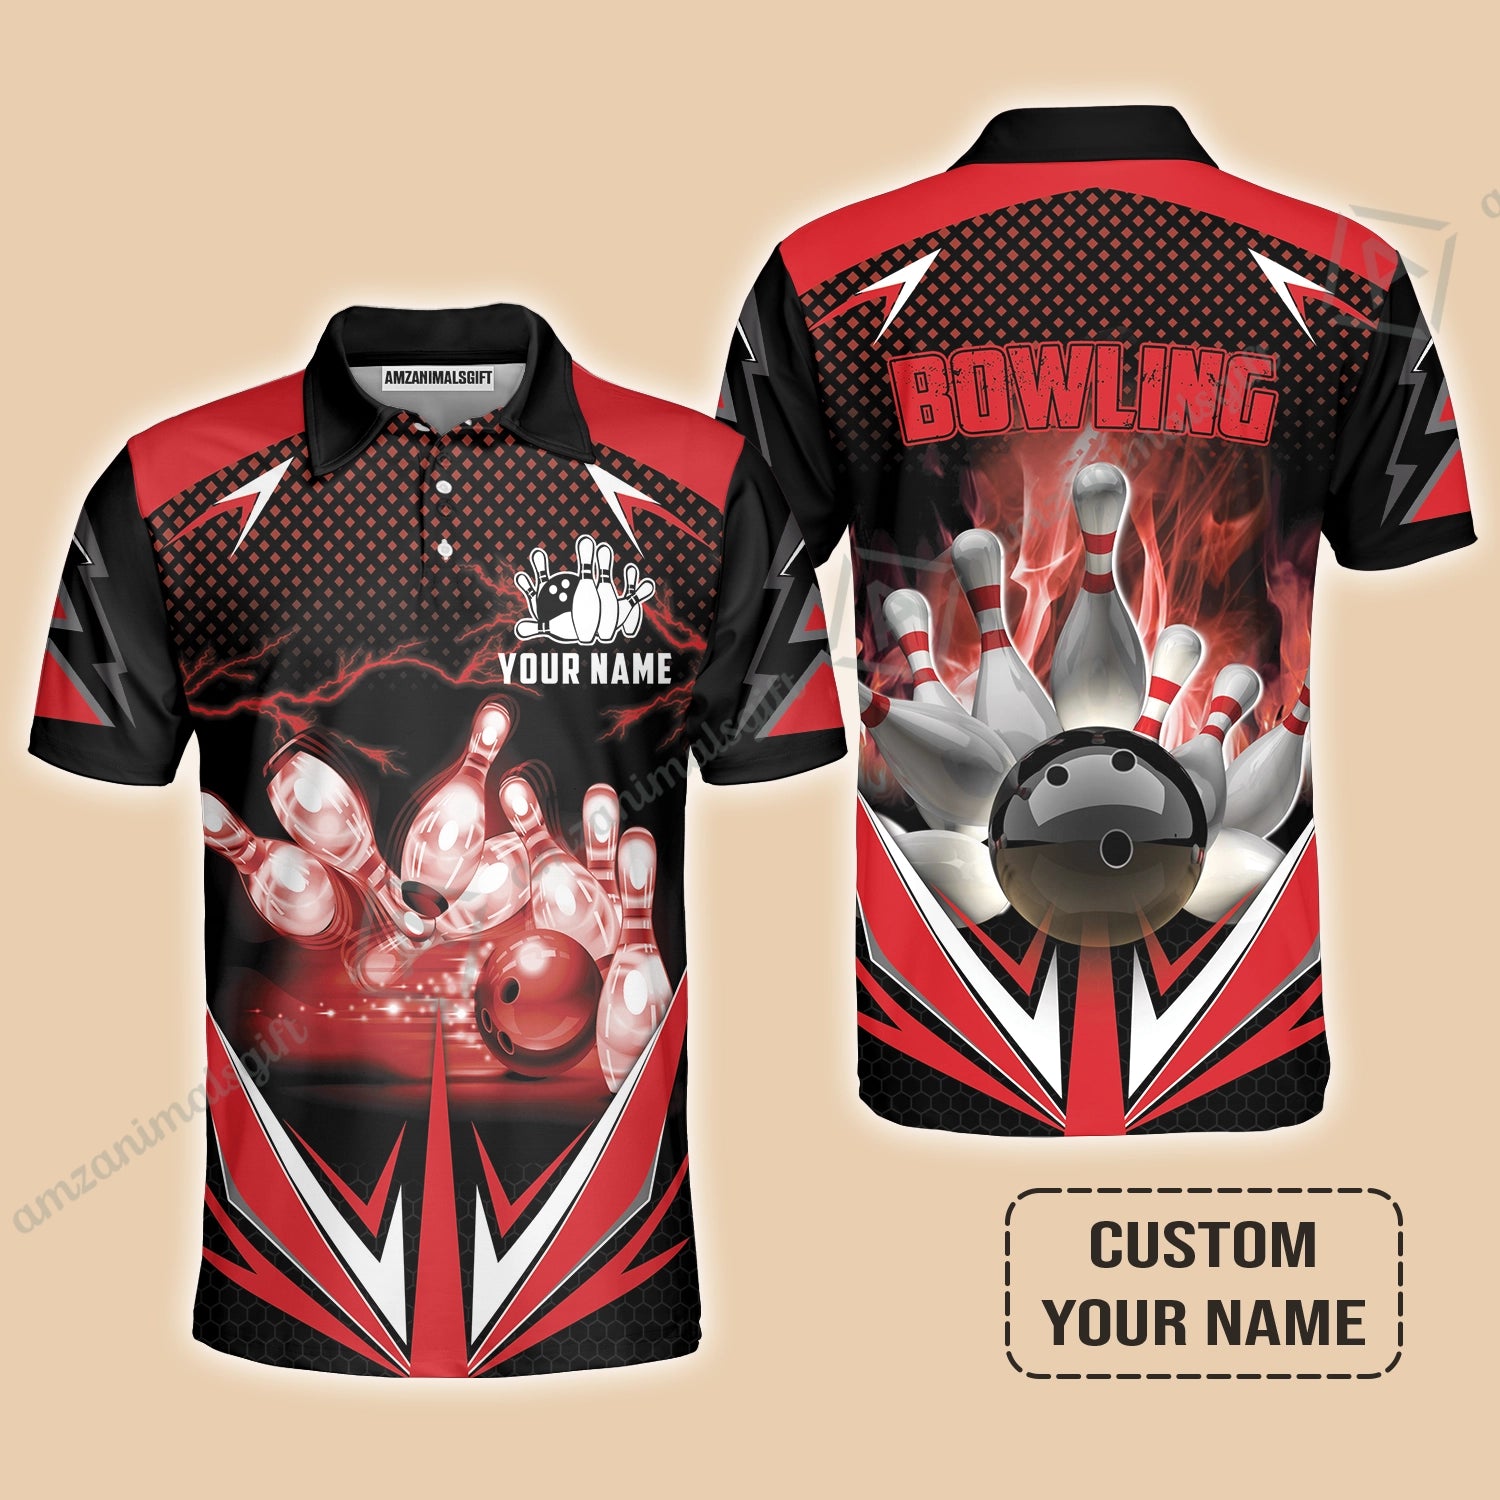 Customized Bowling Red Fire Polo Shirt For Bowling Players, Bowling Team Uniform Shirts, Gift For Men, Bowling Lovers, Bowlers